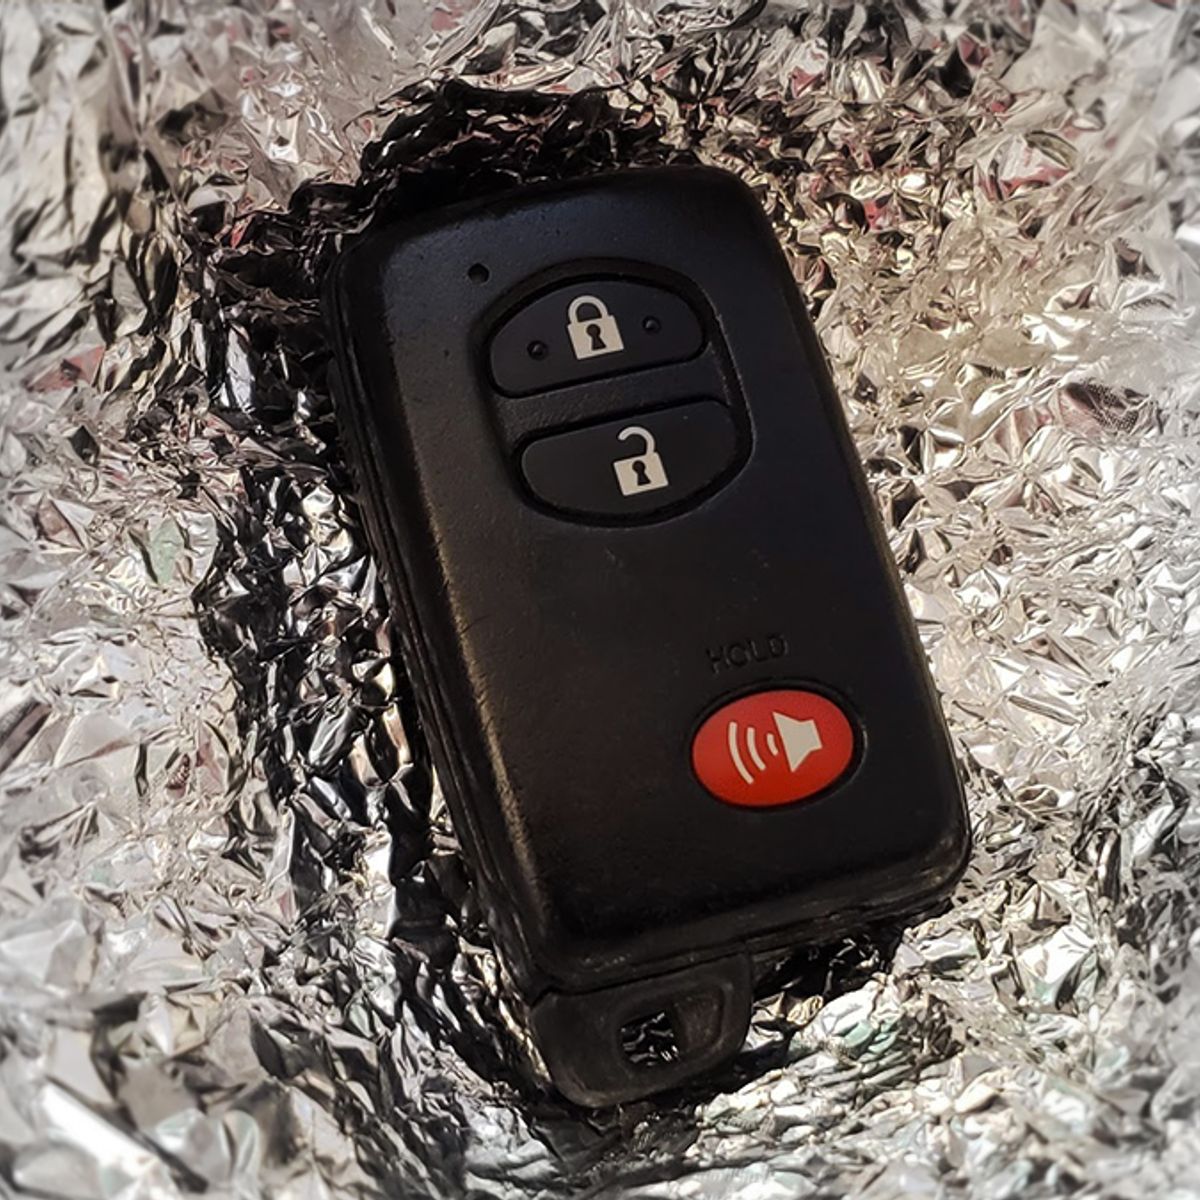 Block the Car Door Relay Hack with a Faraday Cage